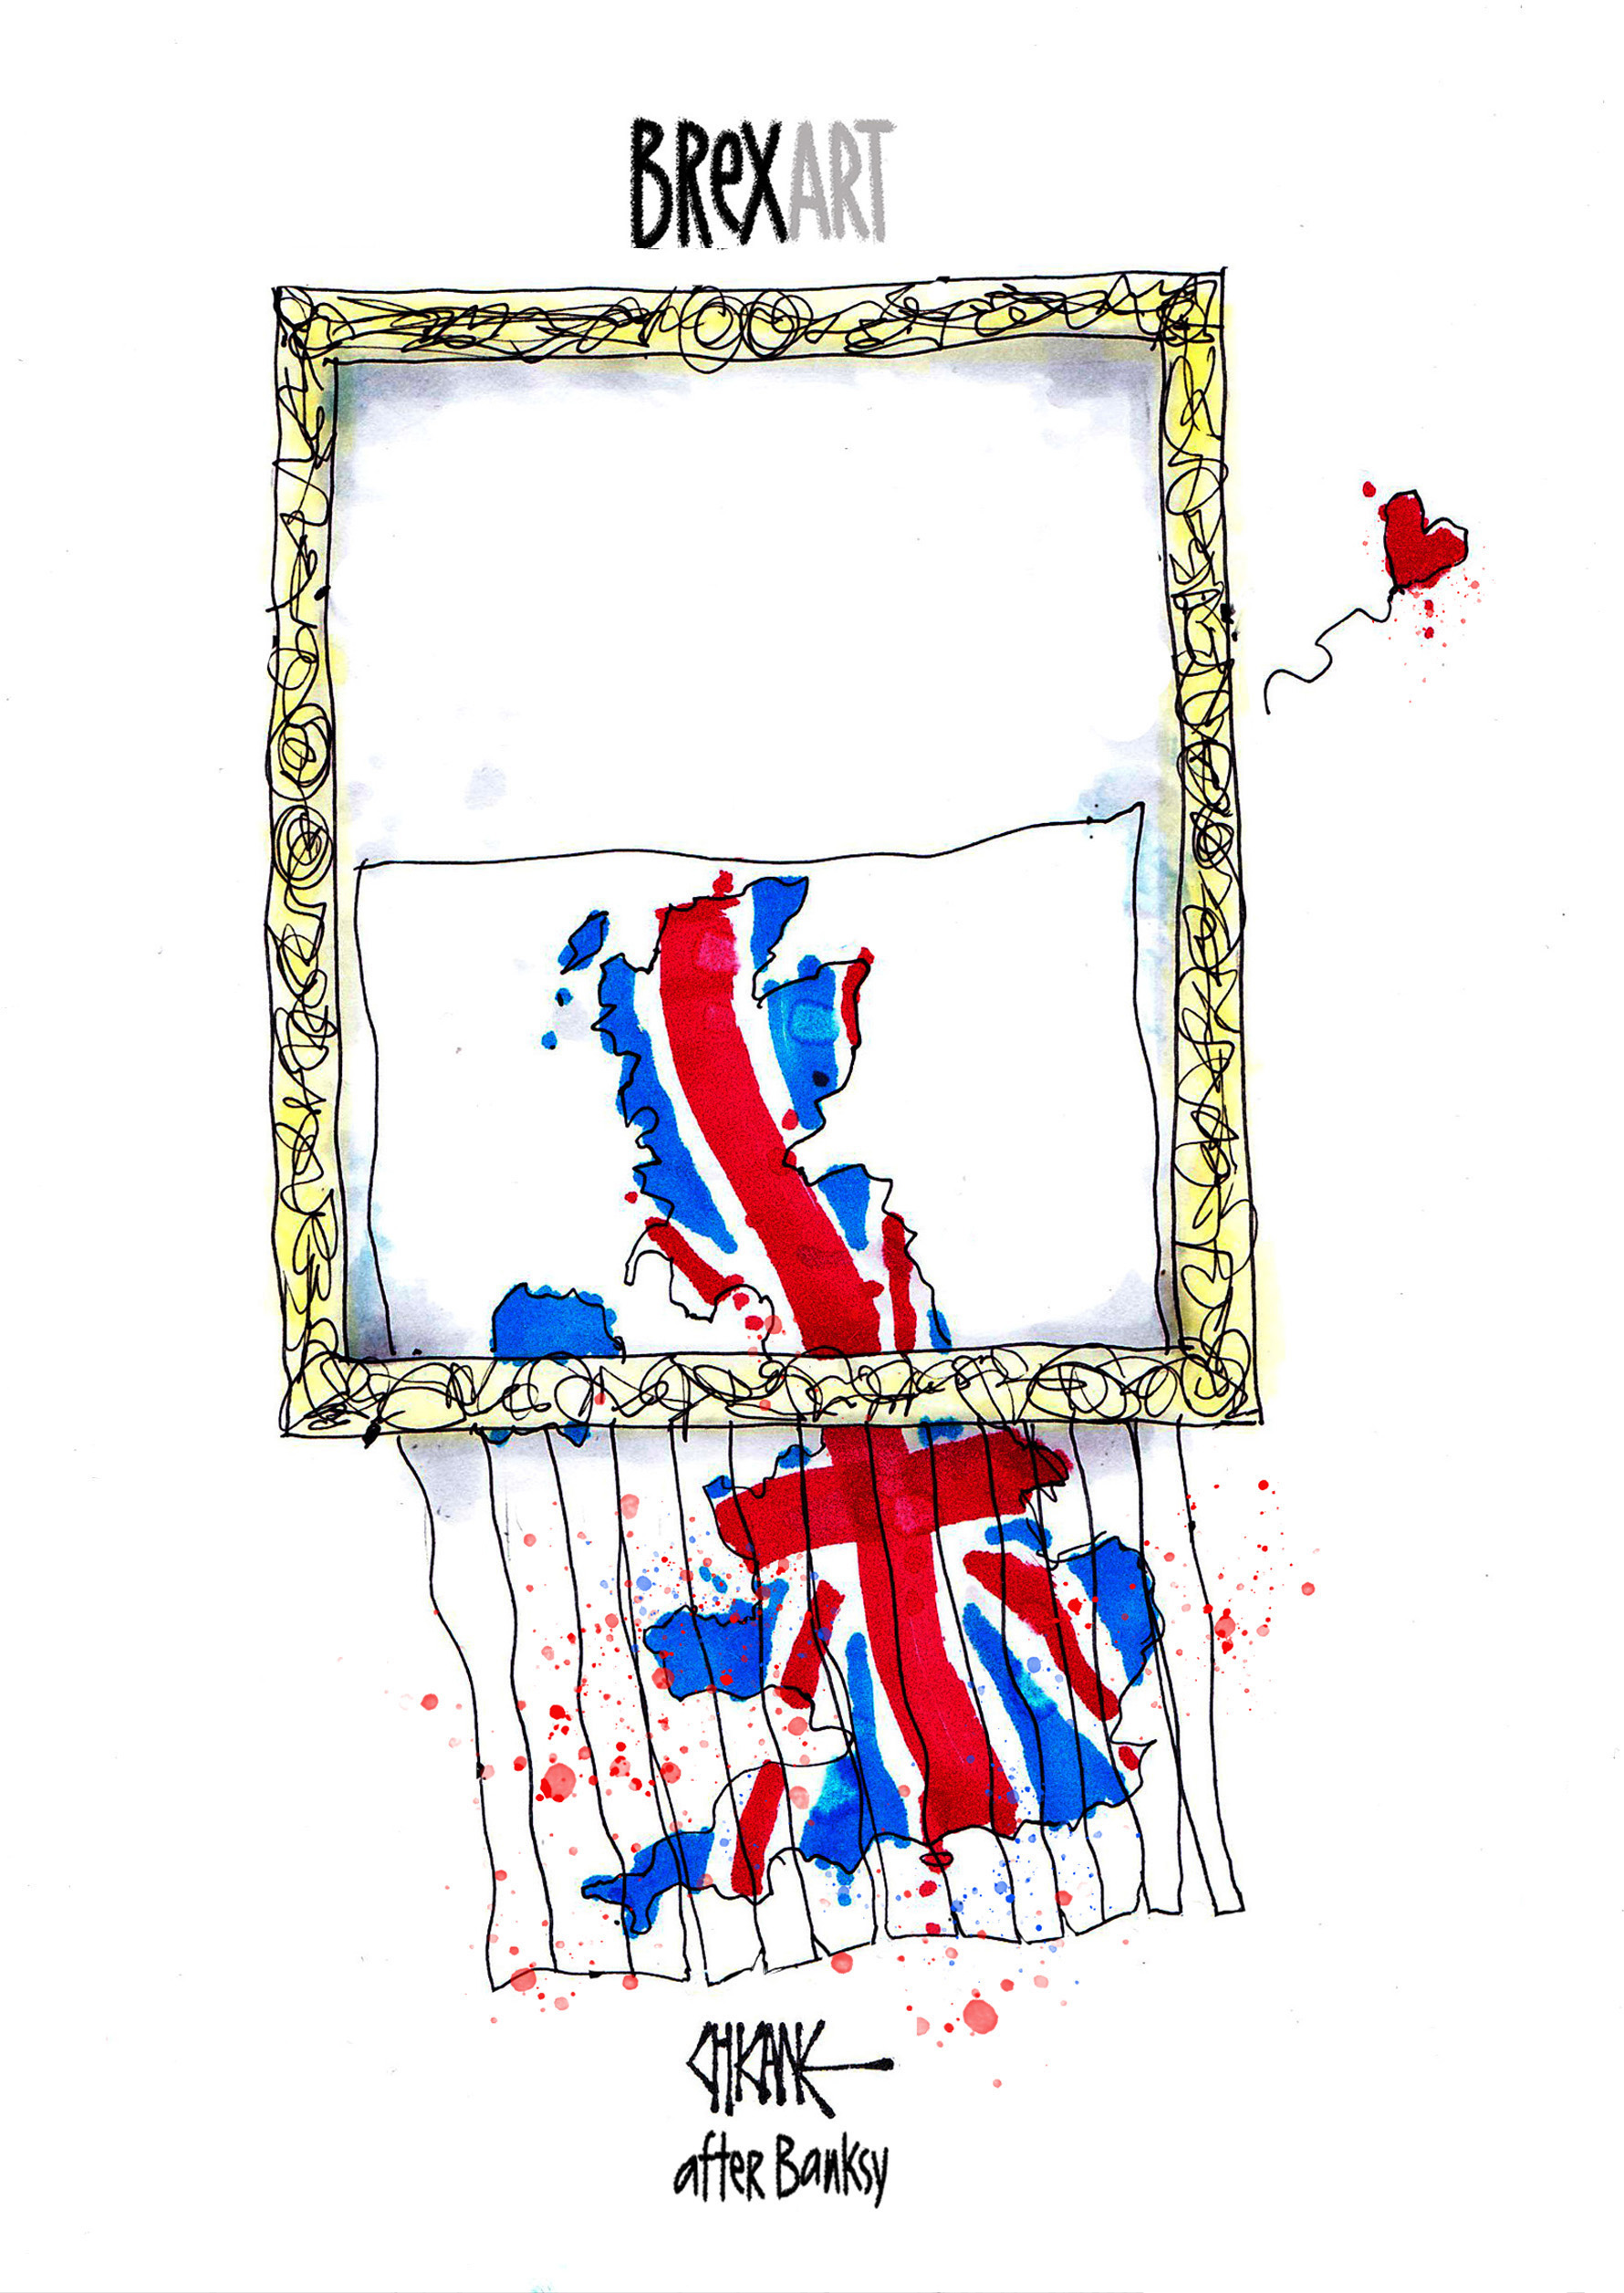 Brexart. A map of the UK is shredded through a frame. Cartoon by Chicane (after Banksy)